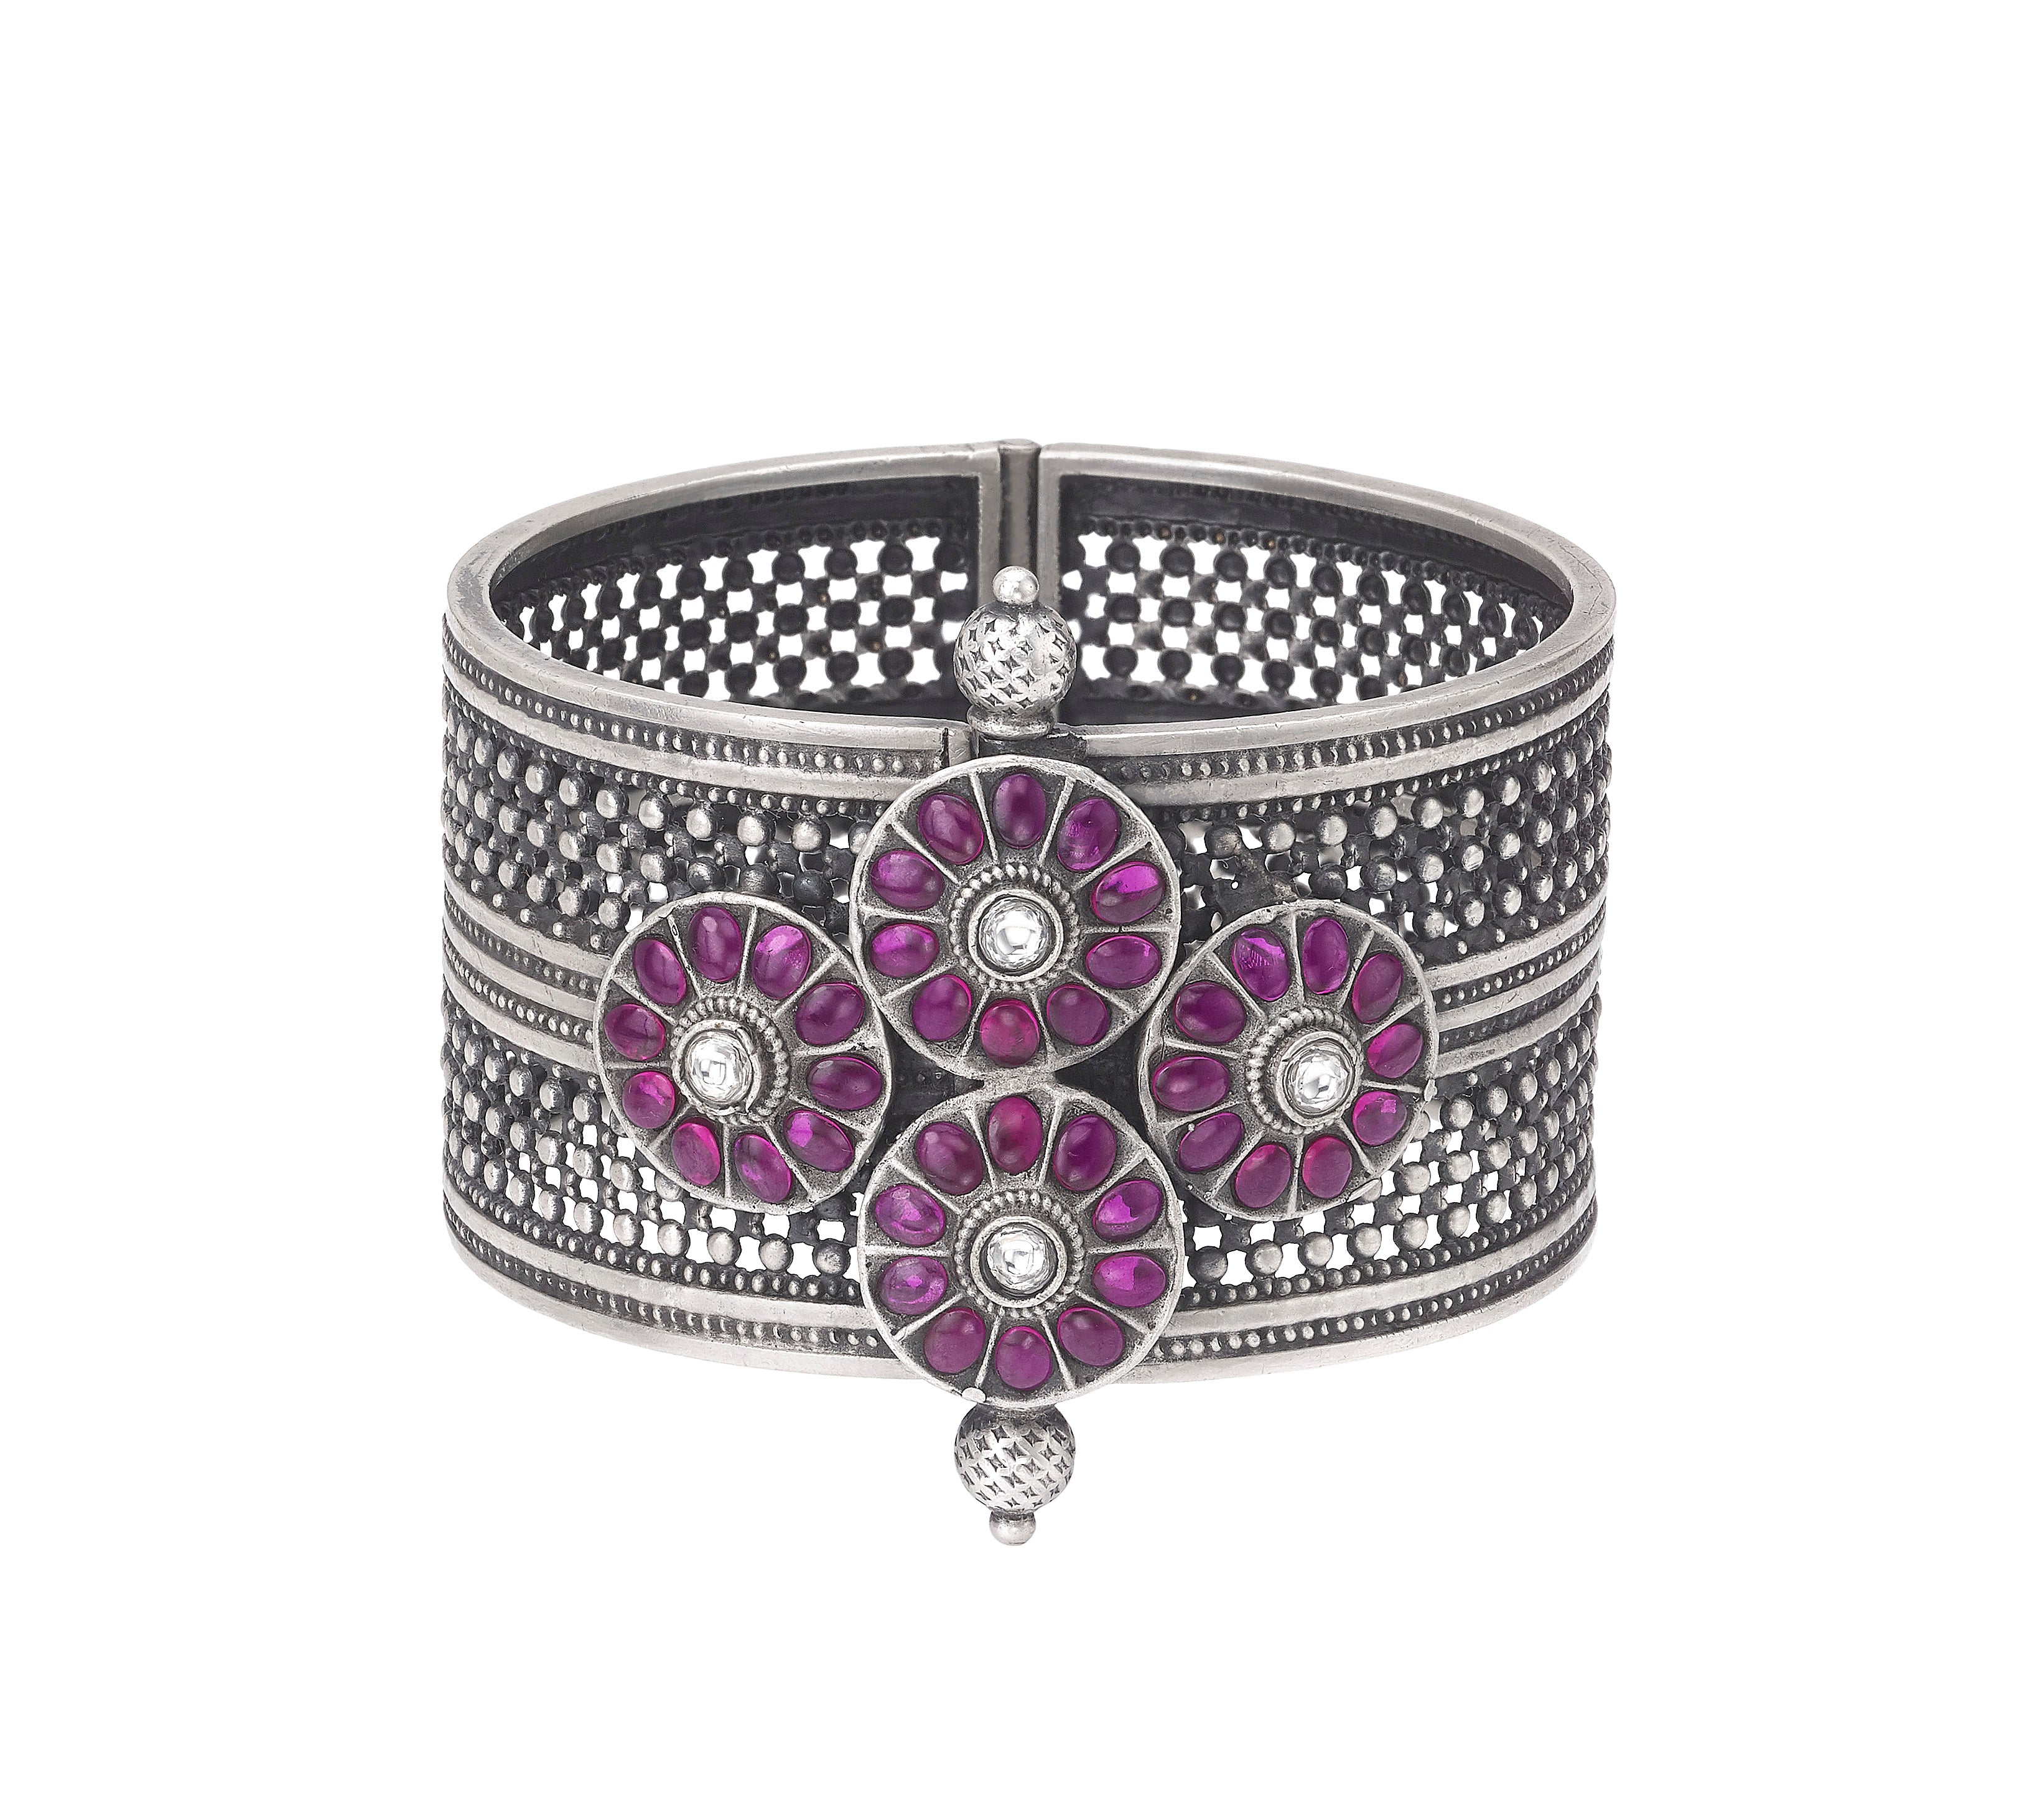 Sterling Silver Bangle with Floral Motifs